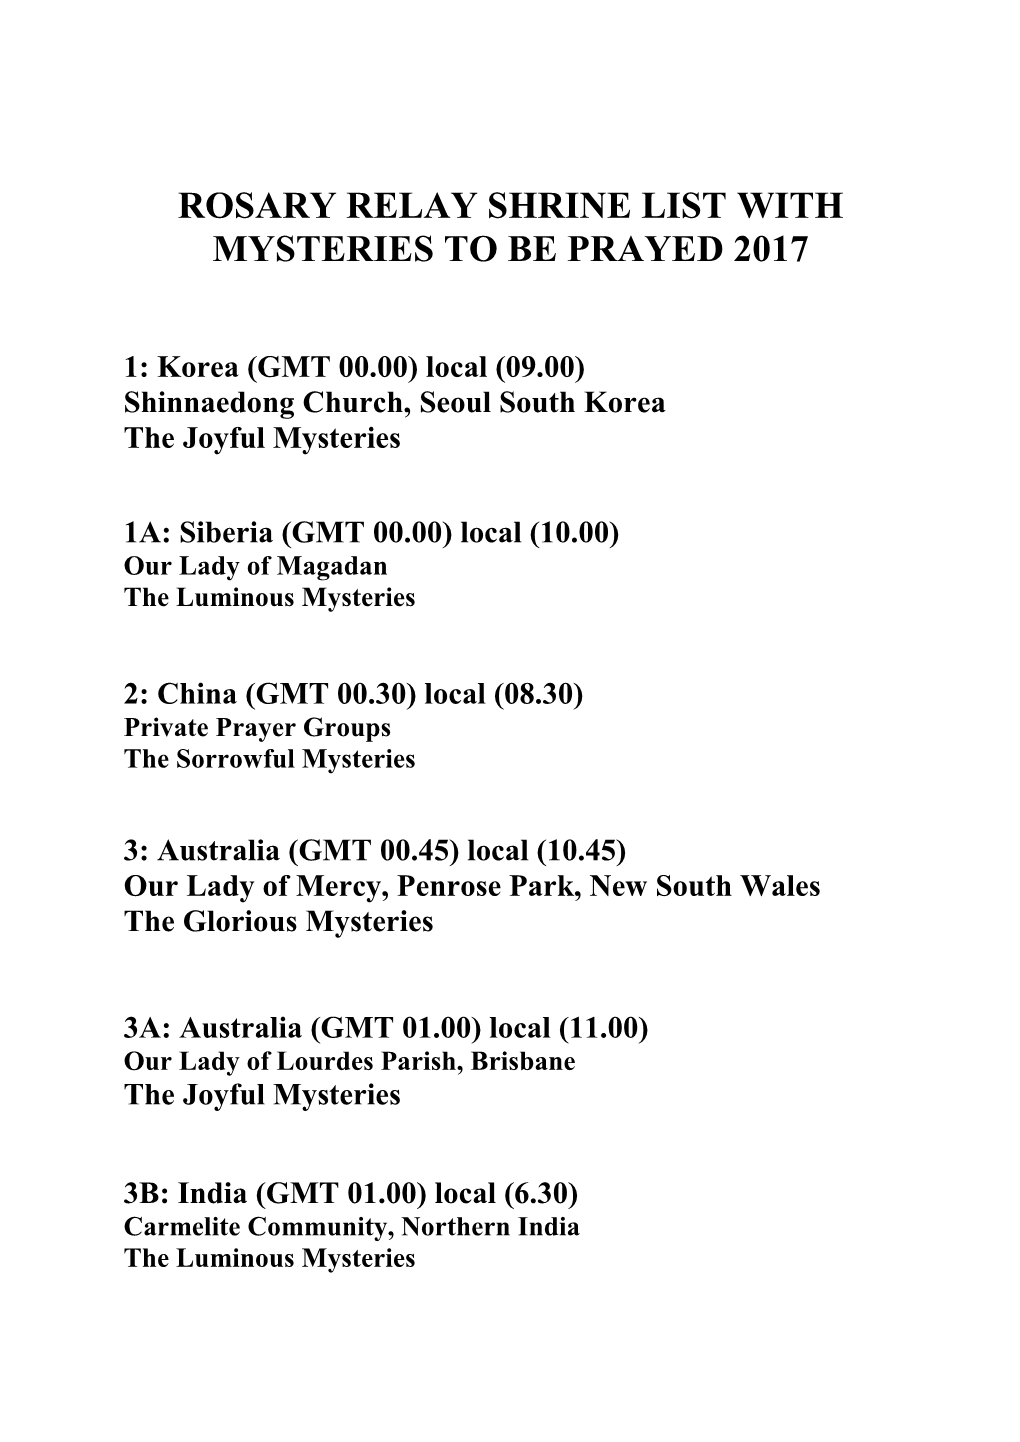 Rosary Relay Shrine List with Mysteries to Be Prayed 2017